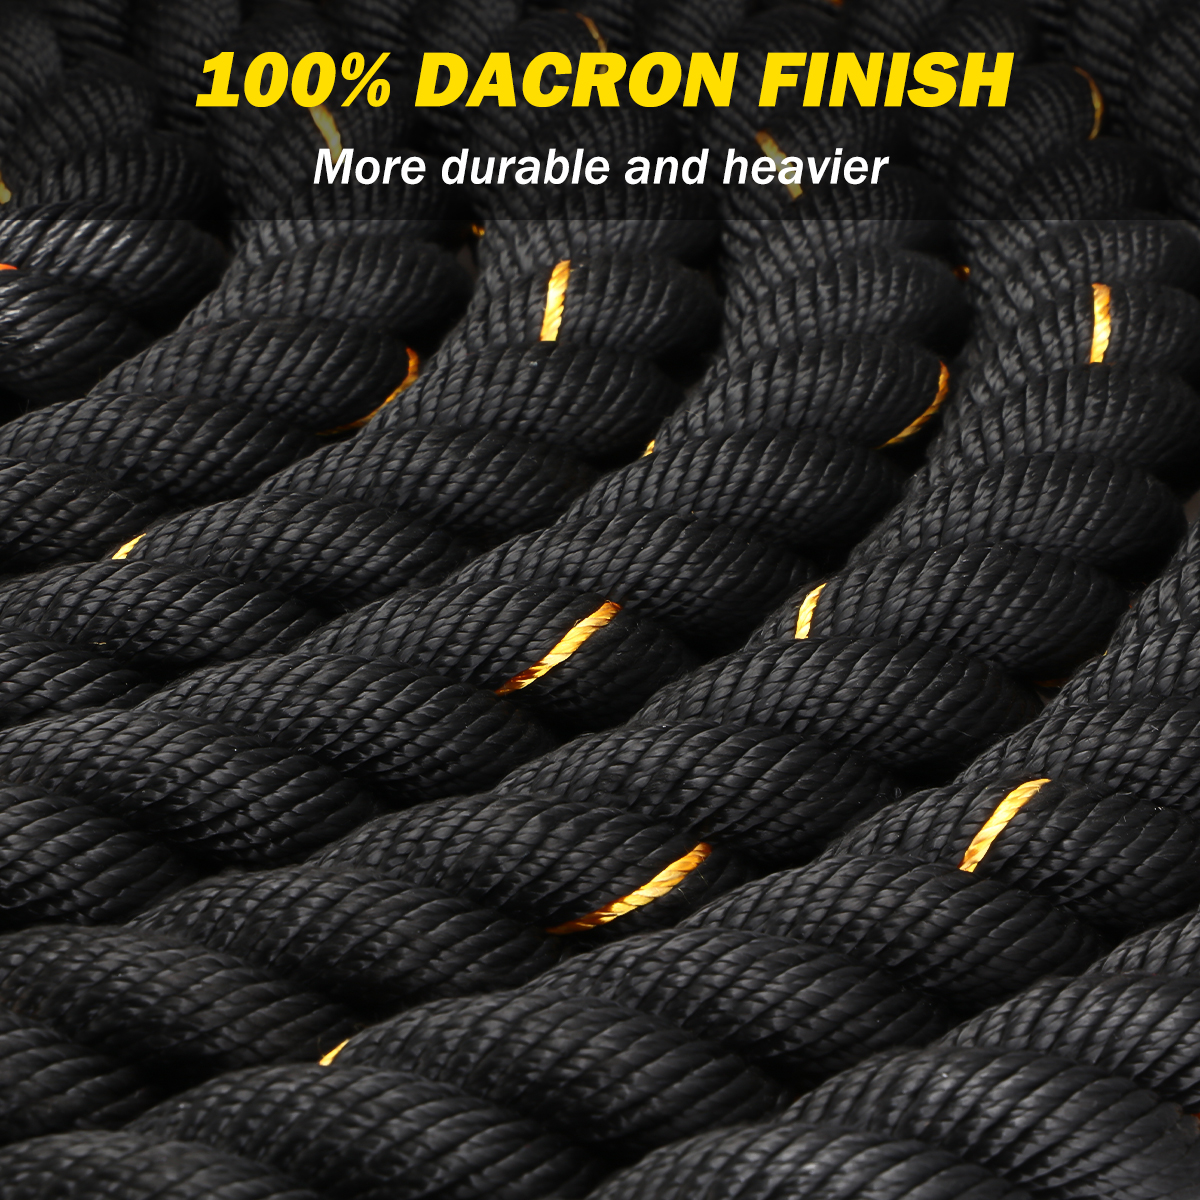 1.5inch Heavy Exercise Training Rope 30ft Length,Heavy Battle Rope for Strength Training - image 4 of 9